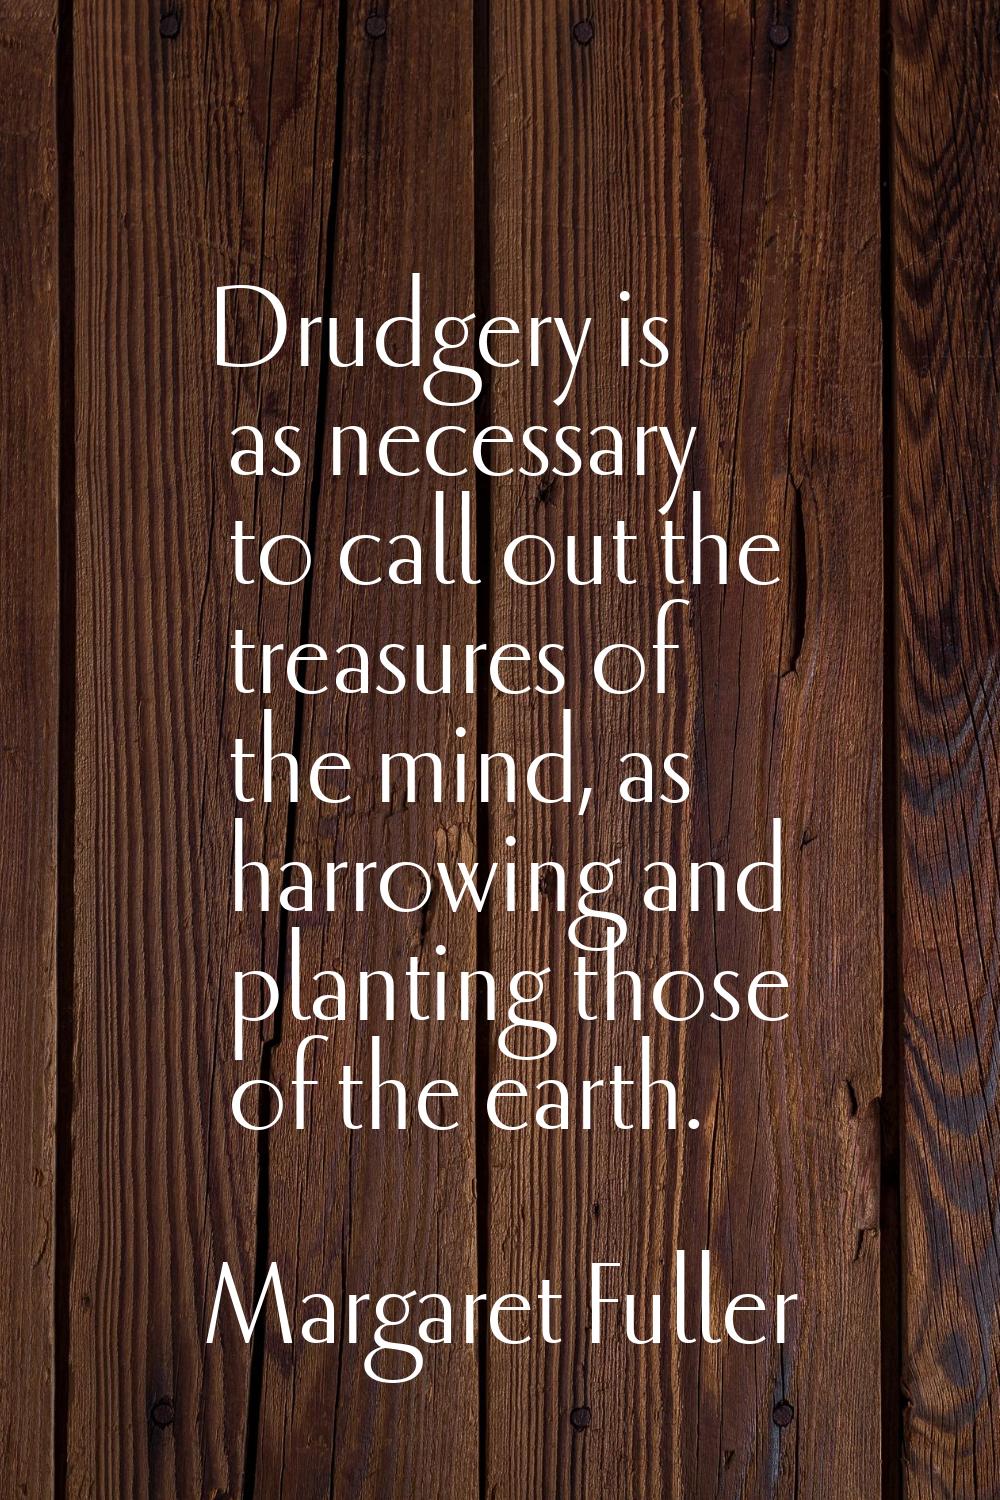 Drudgery is as necessary to call out the treasures of the mind, as harrowing and planting those of 